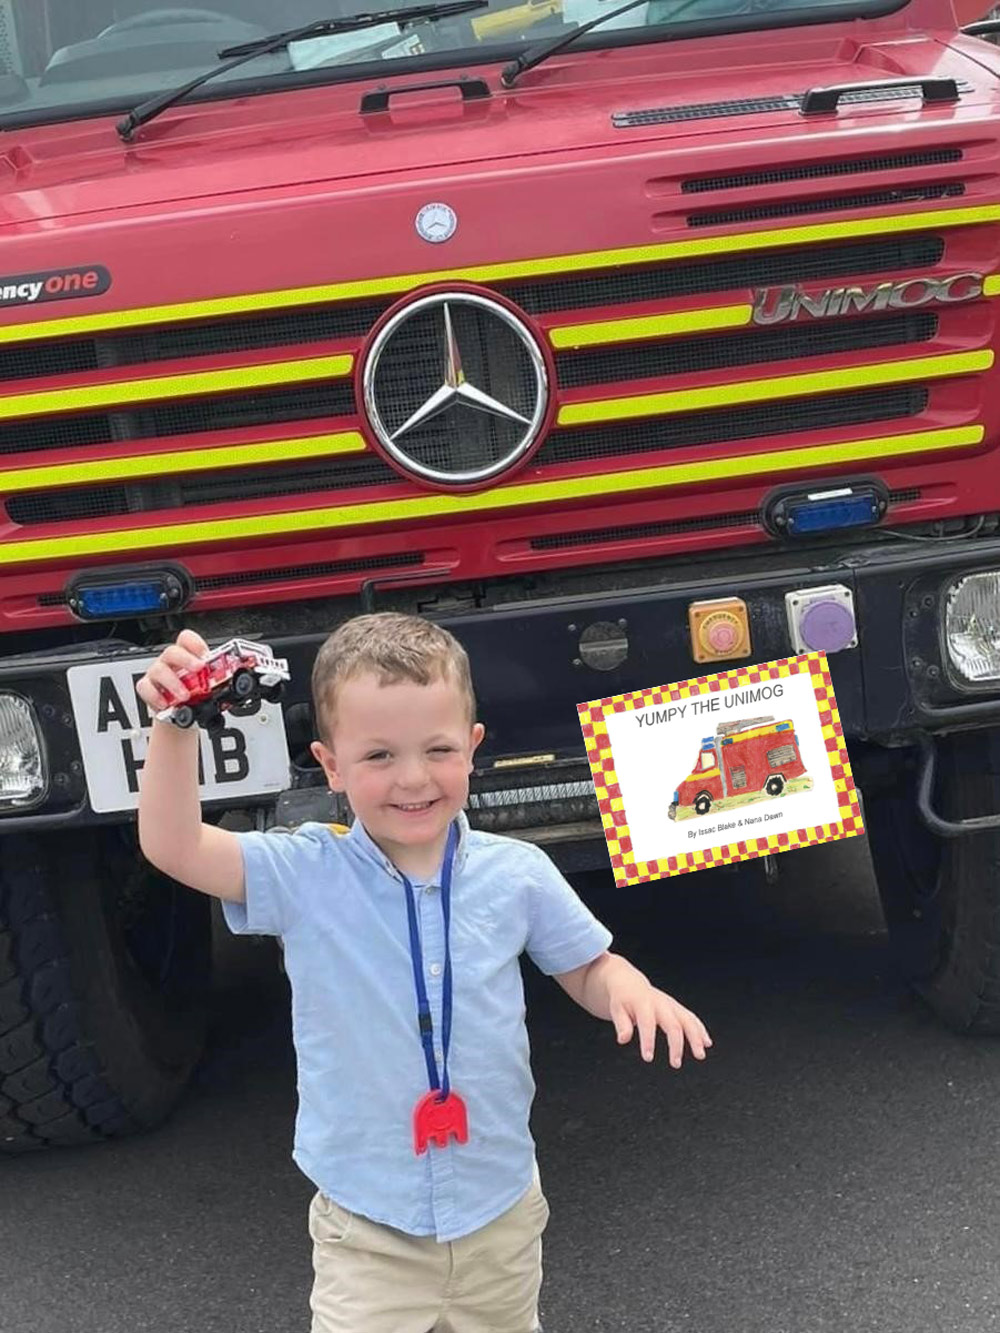 YOUNG Issac Blake (pictured) from Swanage loves fire engines so much he is writing a series of children’s books about them.